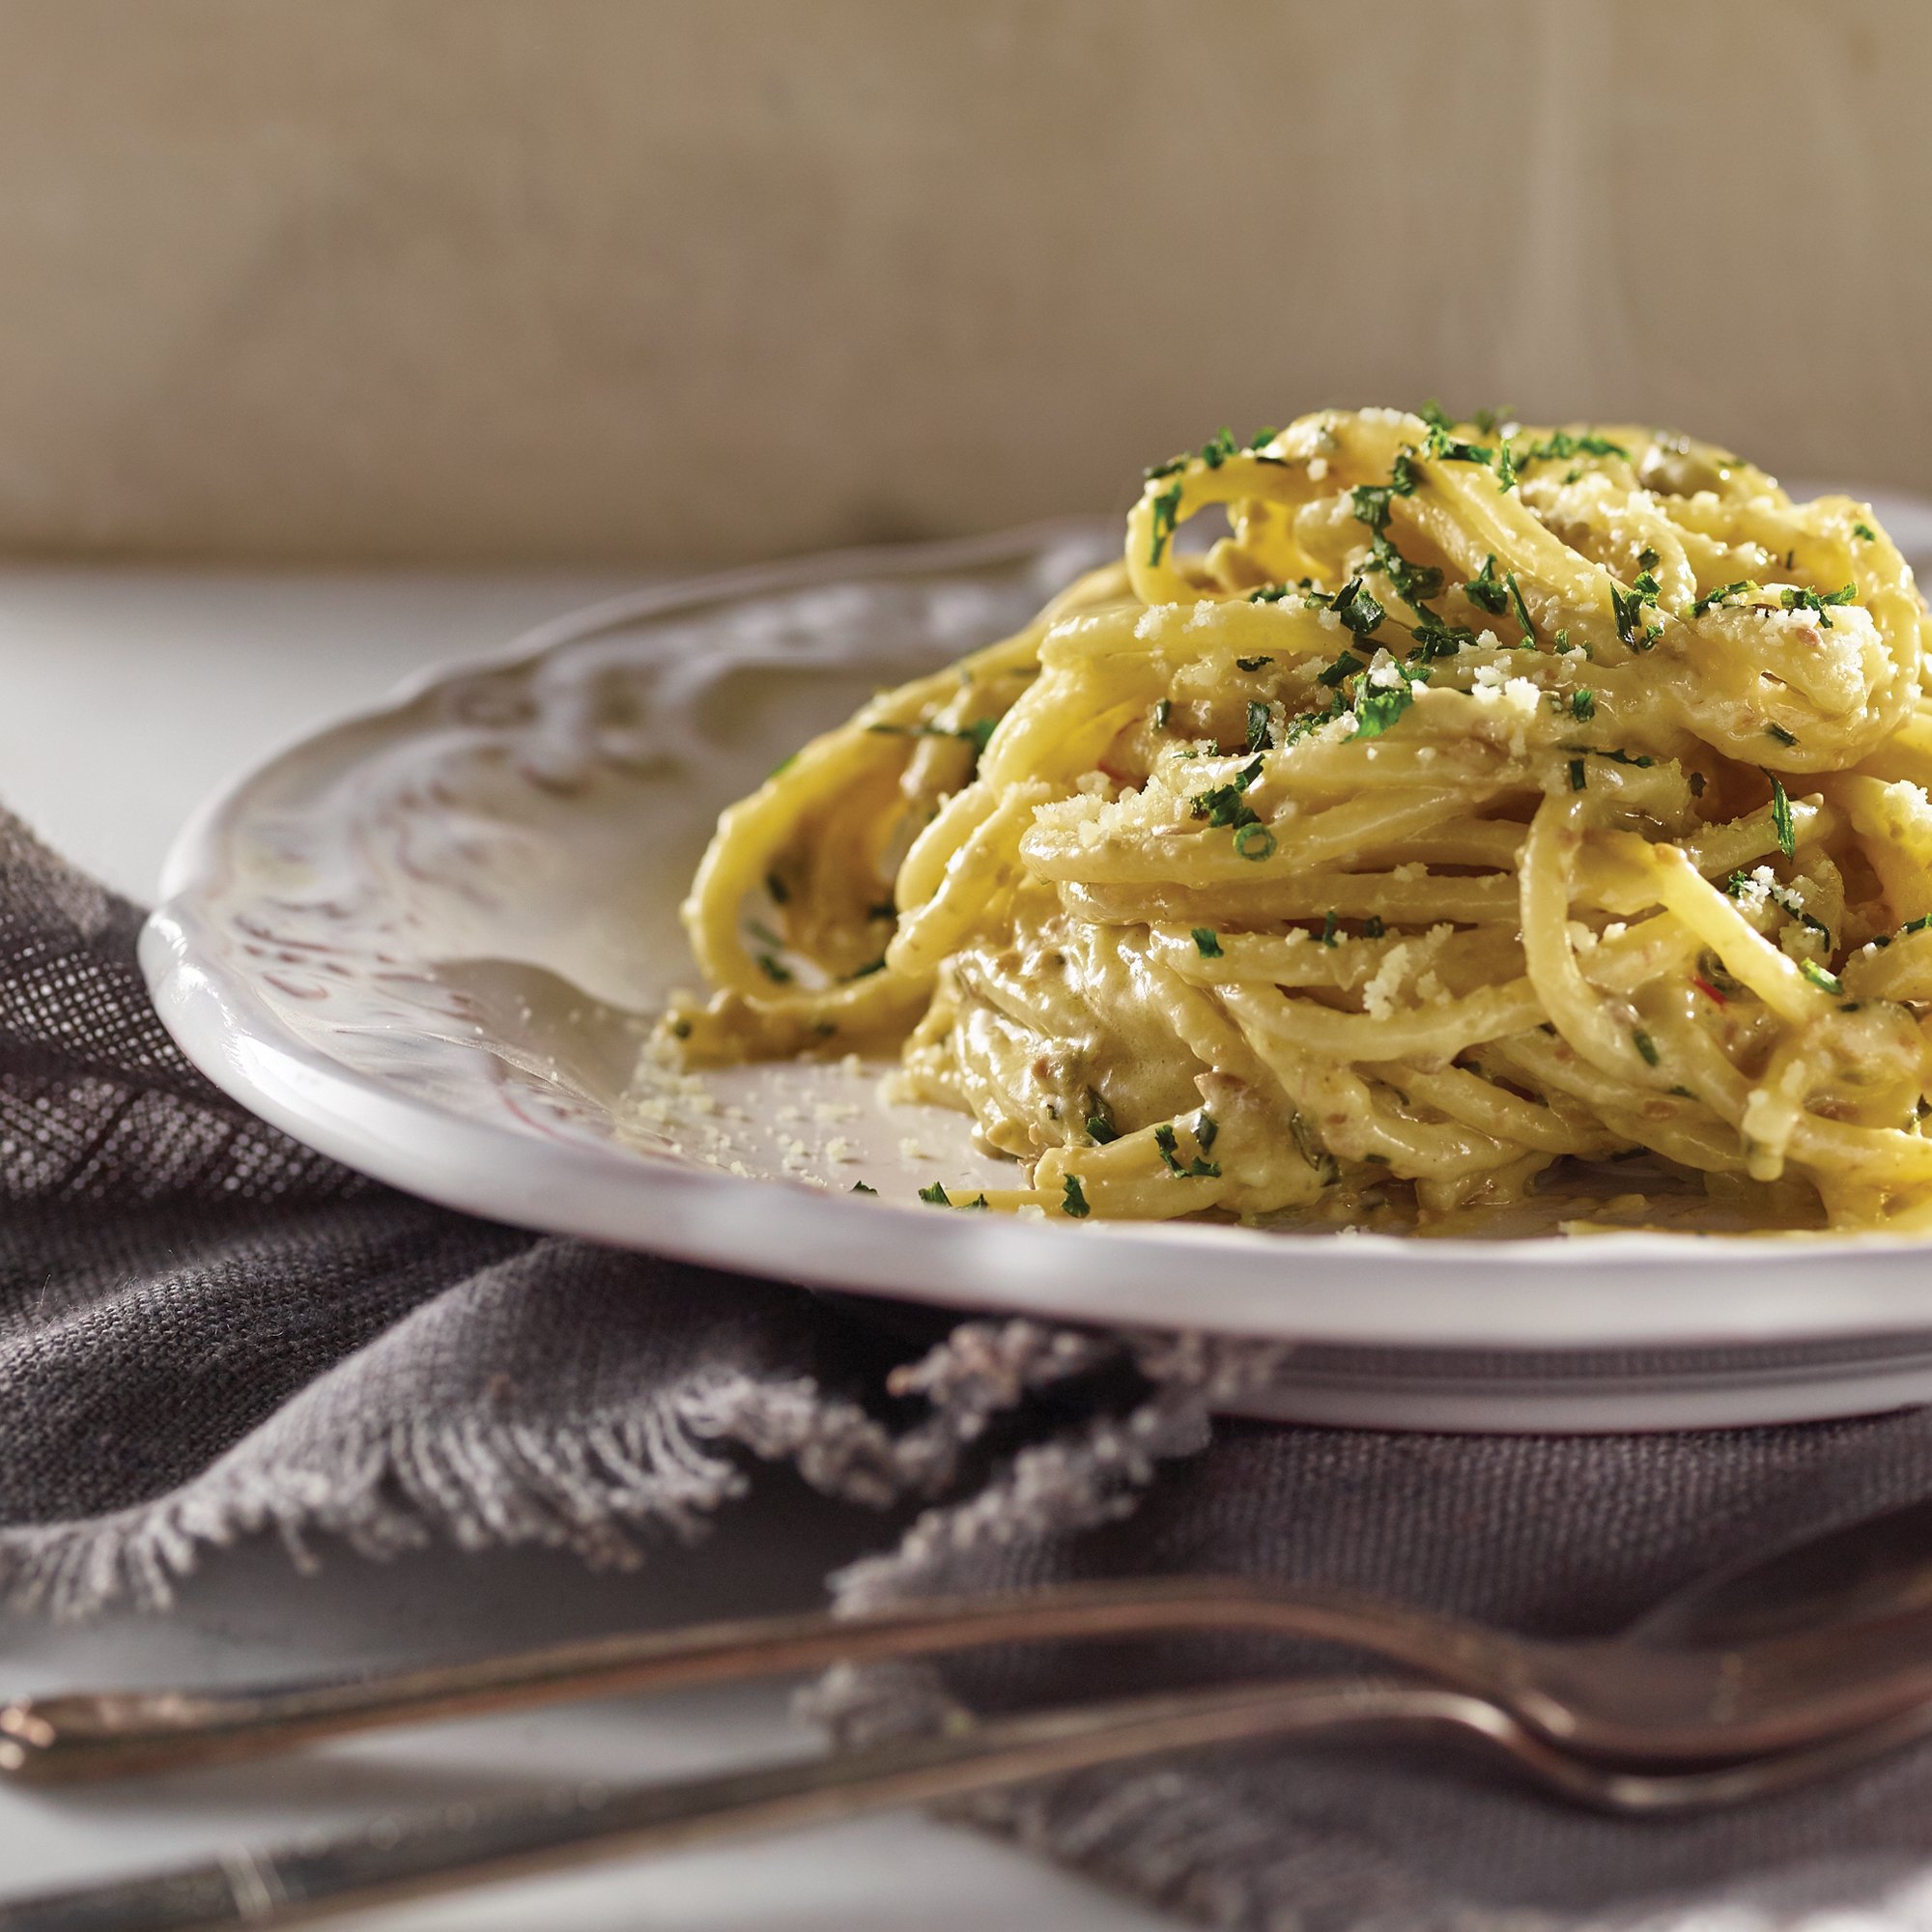 https://images.heb.com/is/image/HEBGrocery/recipe-hm-large/spaghetti-alla-chitarra-with-creamy-olive-and-chive-alfredo-recipe.jpg